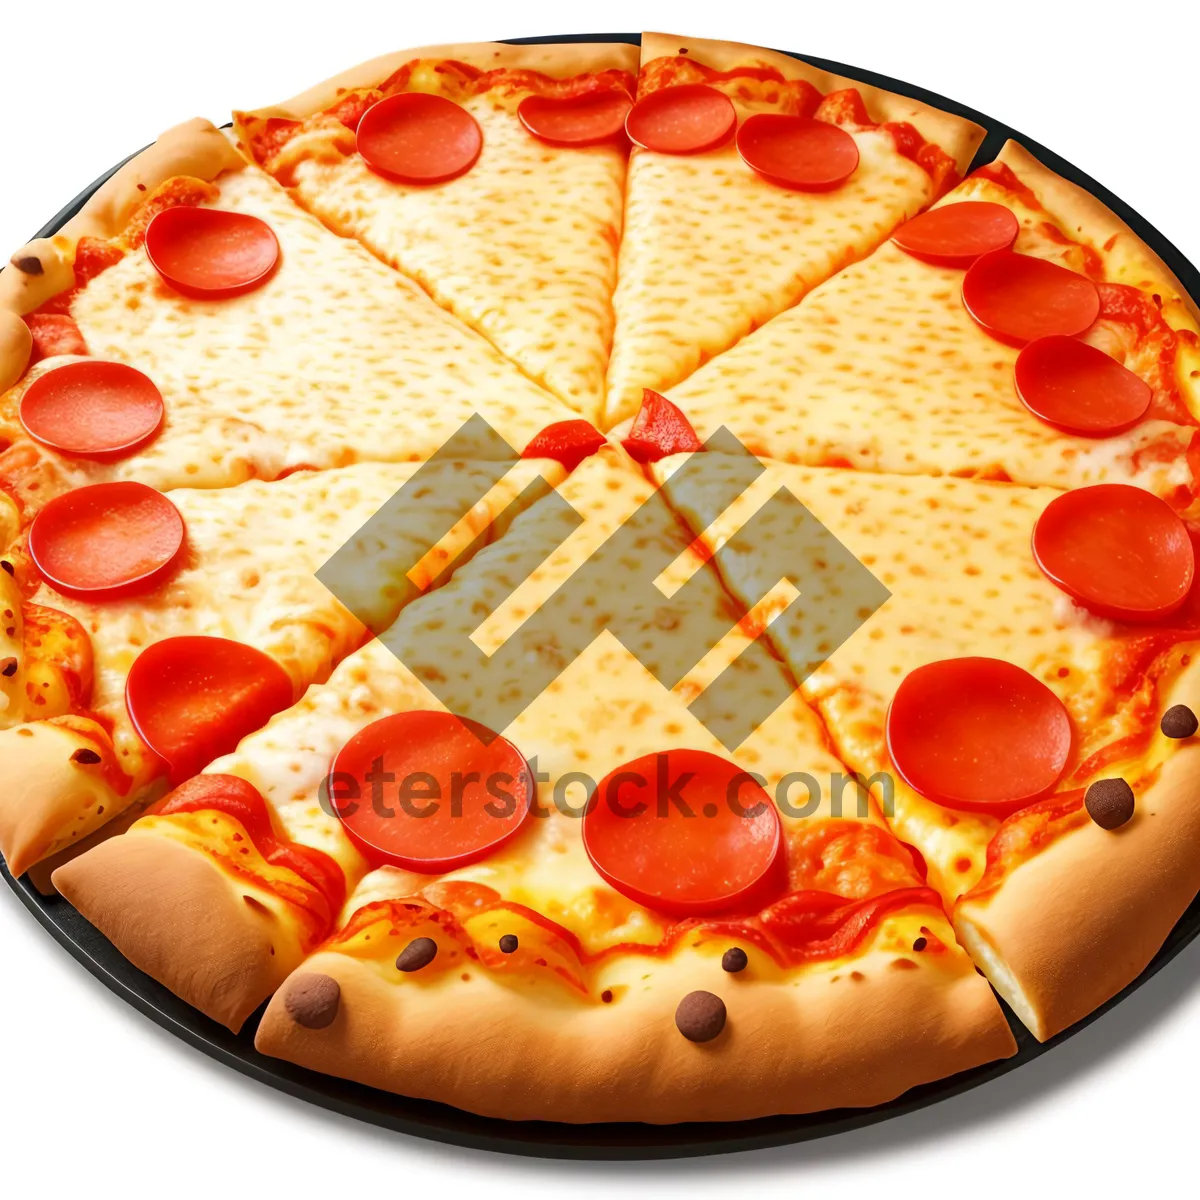 Picture of Delicious Gourmet Pizza Slice with Fresh Ingredients